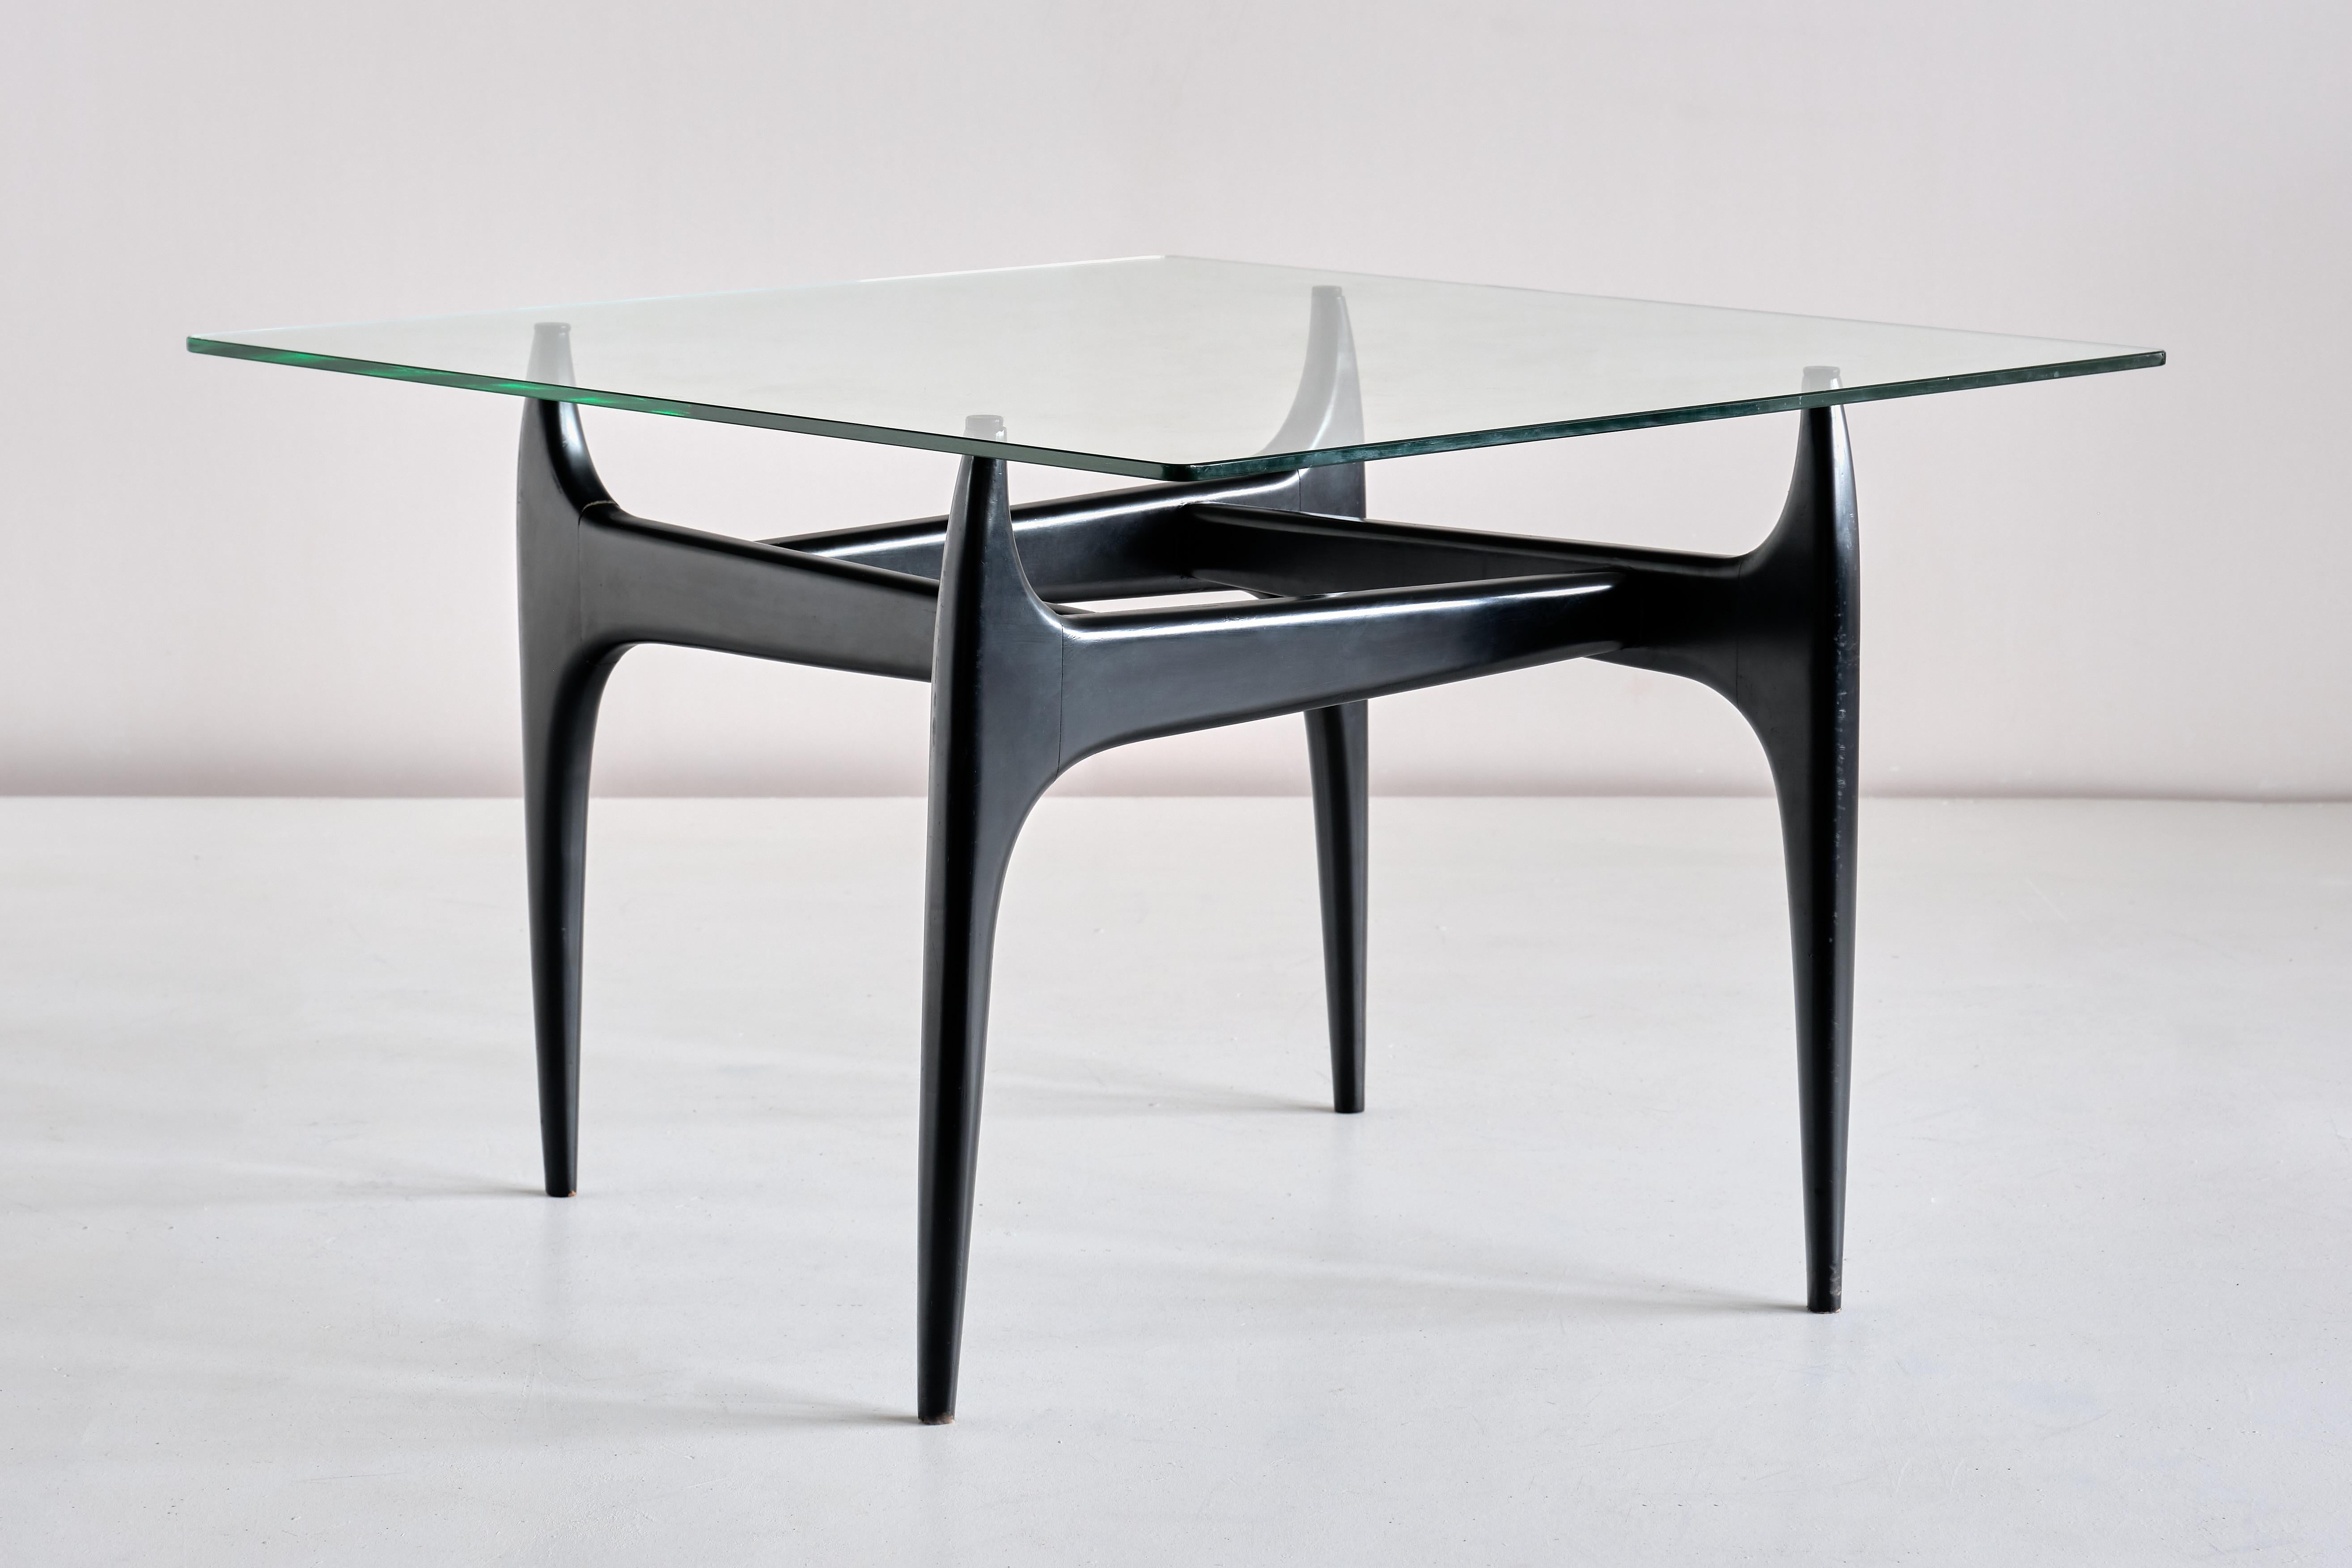 This very rare coffee table was designed by Jos De Mey and produced by the company Luxus in Kortrijk, Belgium in 1957. The elegant base is in black lacquered wood, with a square glass top resting on rubber caps. A refined design which is beautiful